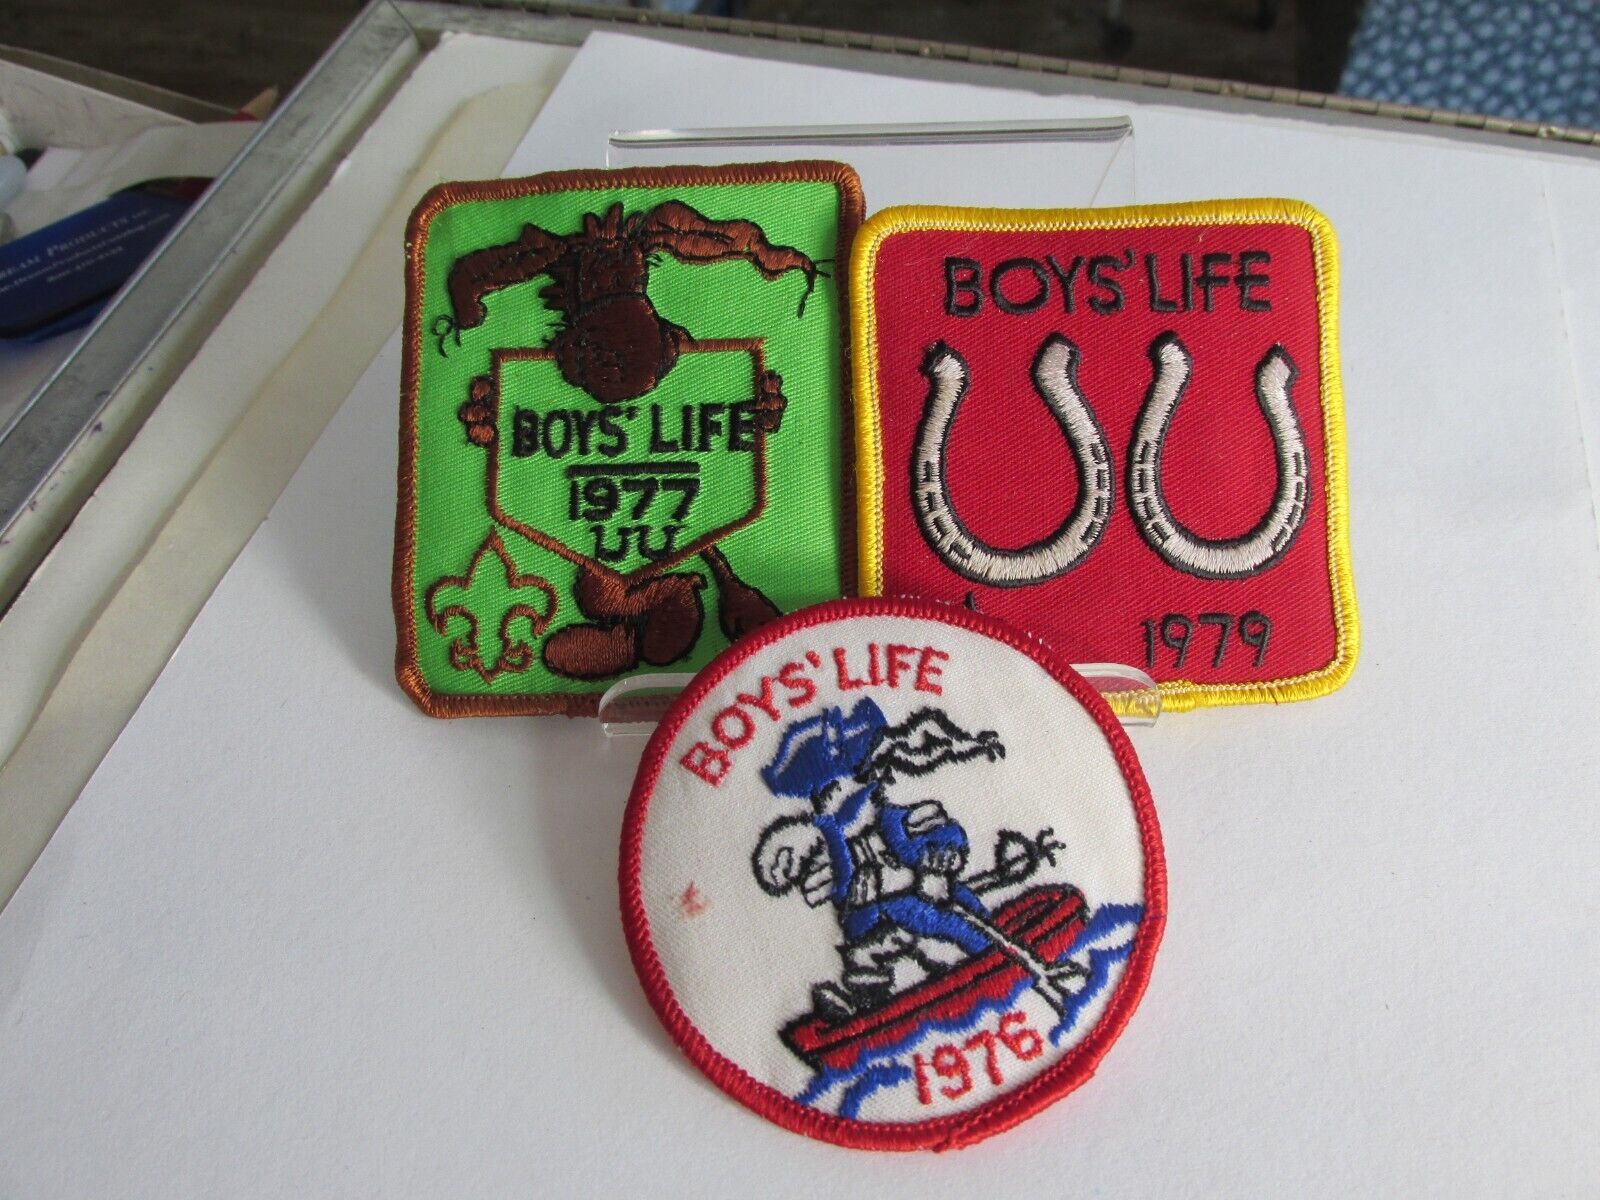 3 Different 1970s BSA Boy Scouts Boys Like Scouting Patches 1976-77-79 BSA patch